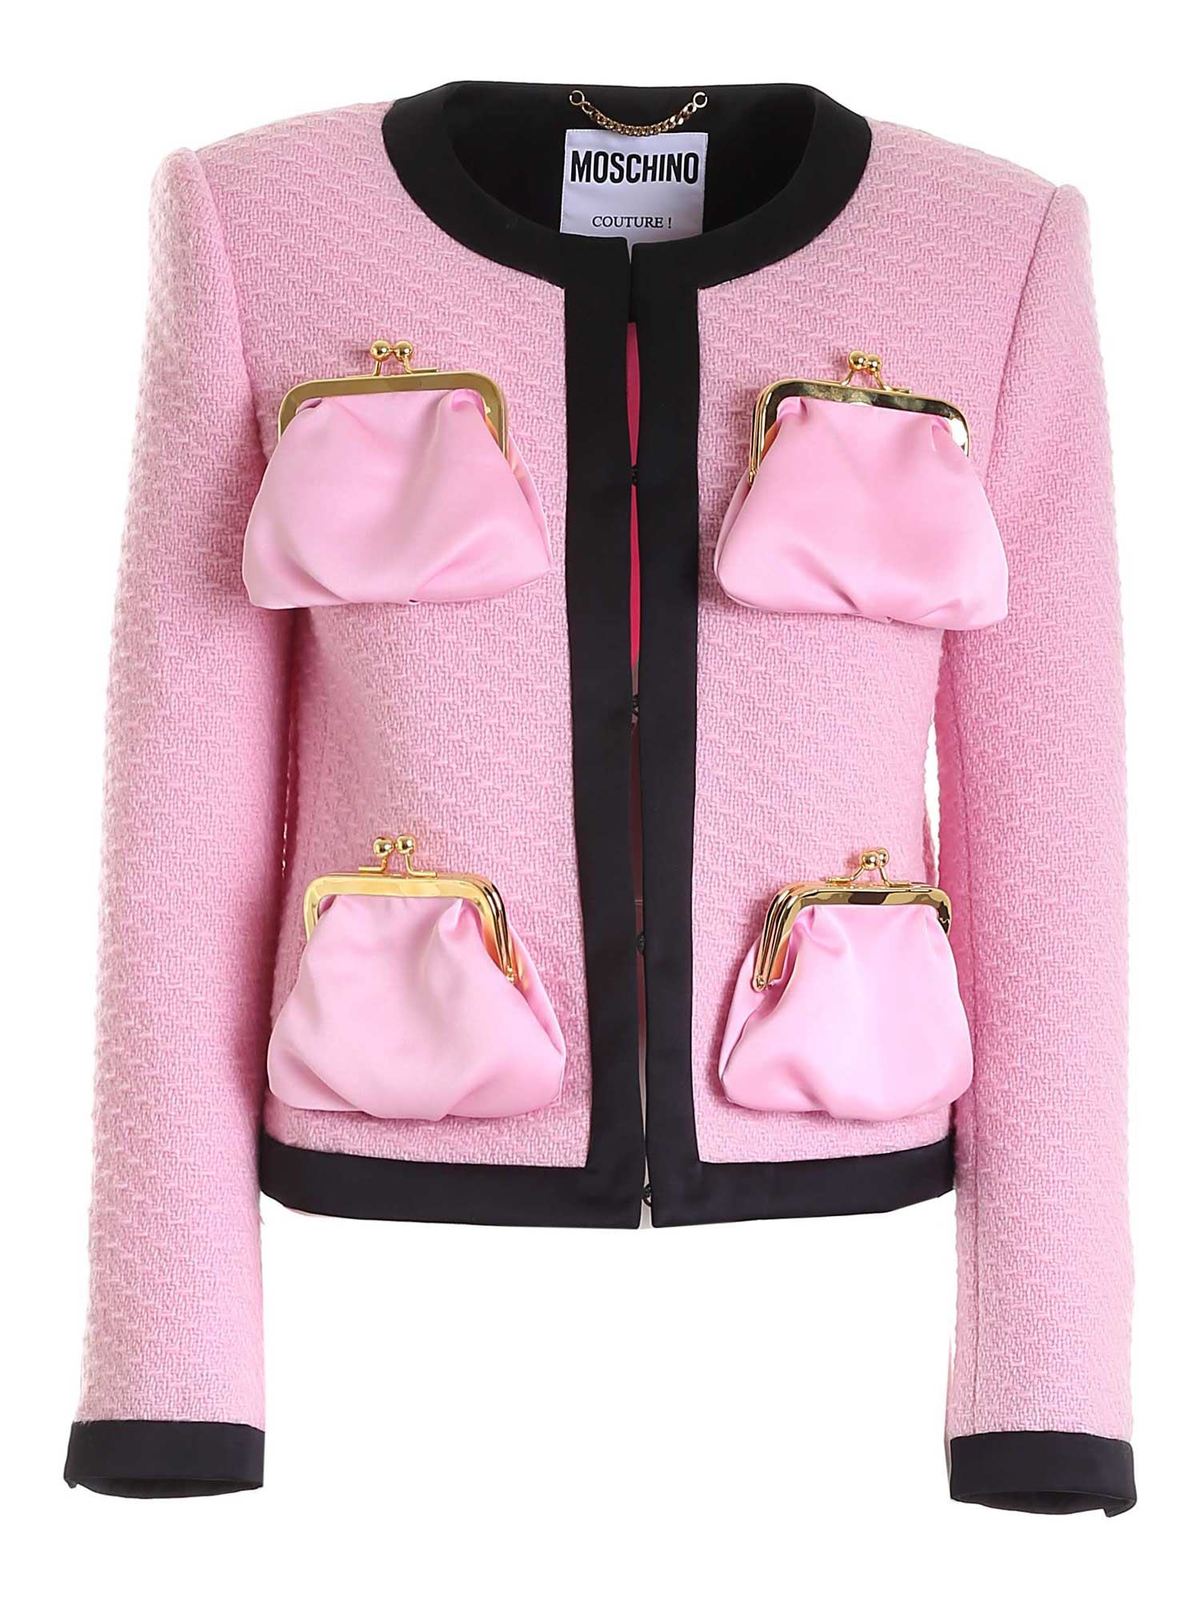 Moschino Archive Purses Jacket In Pink And Black In Rosado